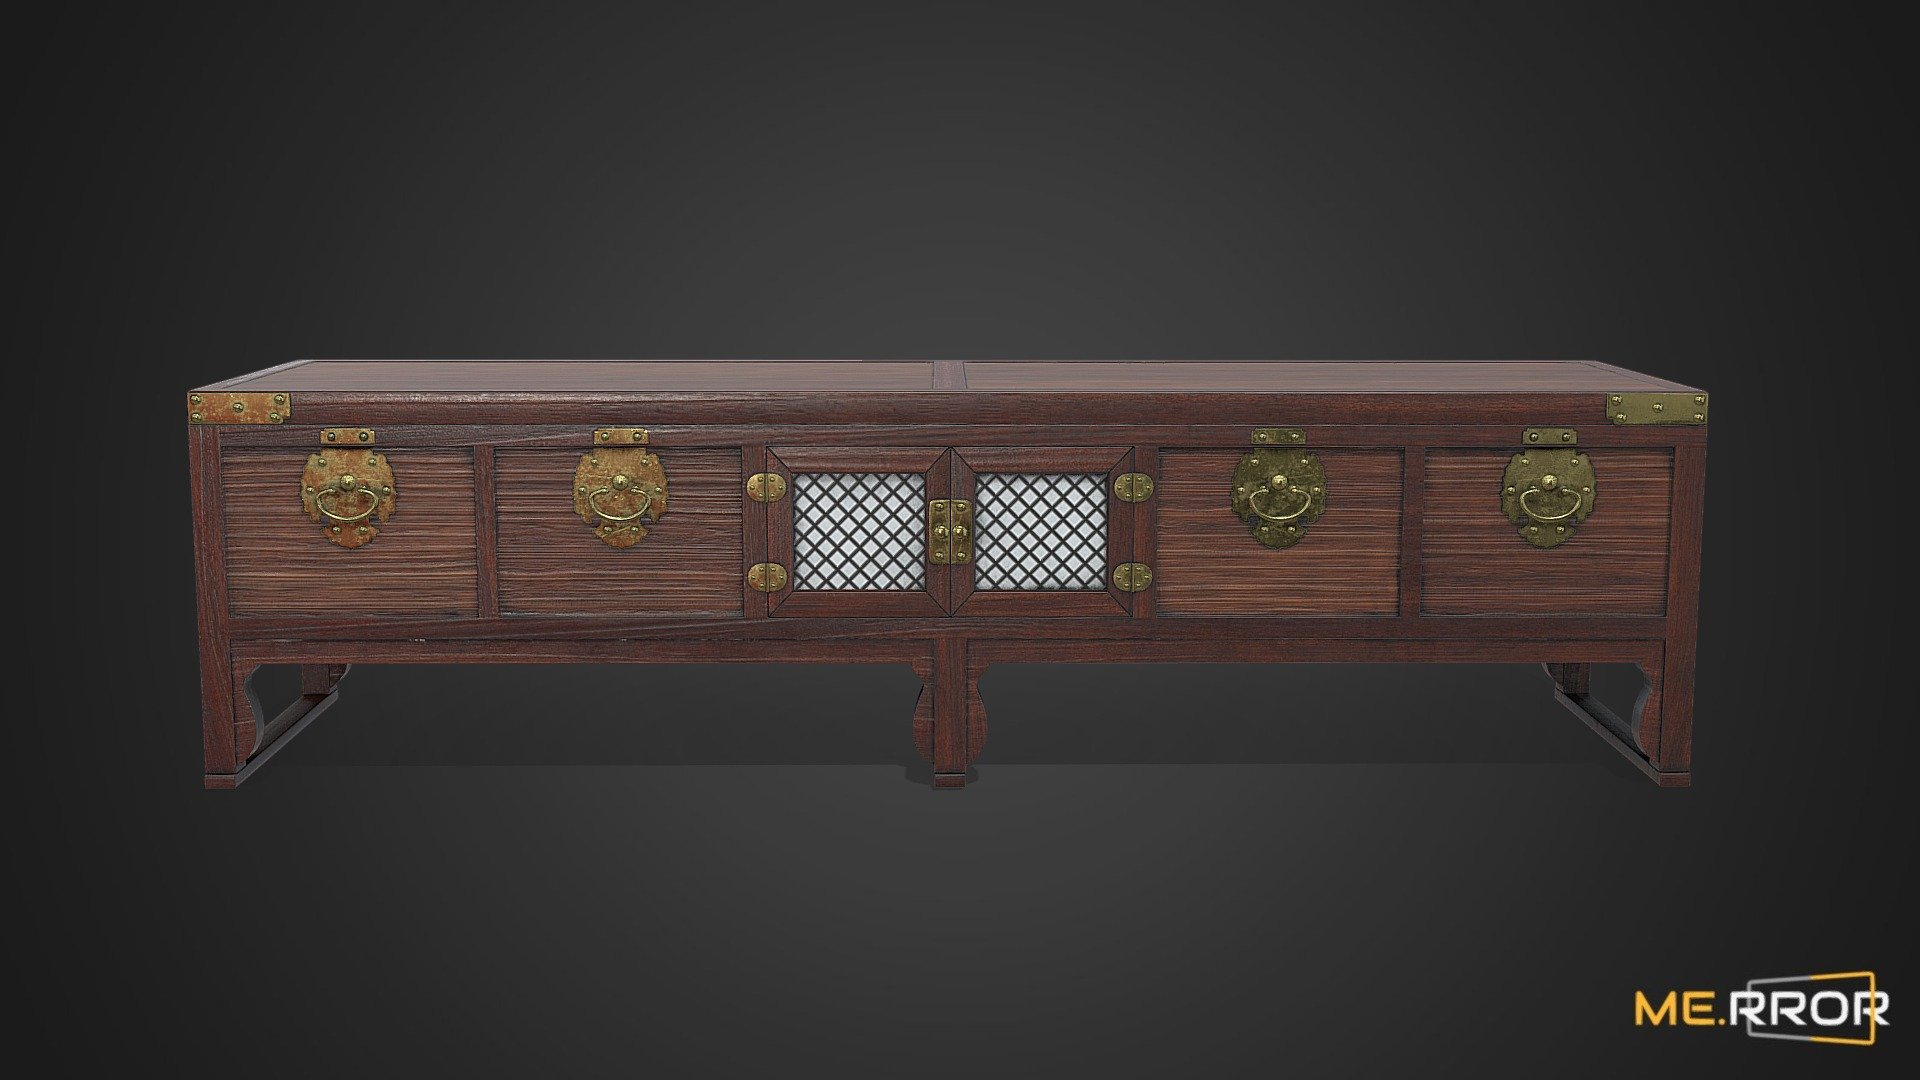 MERROR is a 3D Content PLATFORM which introduces various Asian assets to the 3D world


3DScanning #Photogrametry #ME.RROR - [Game-Ready] Korean Traditional Low Drawer - Buy Royalty Free 3D model by ME.RROR Studio (@merror) 3d model